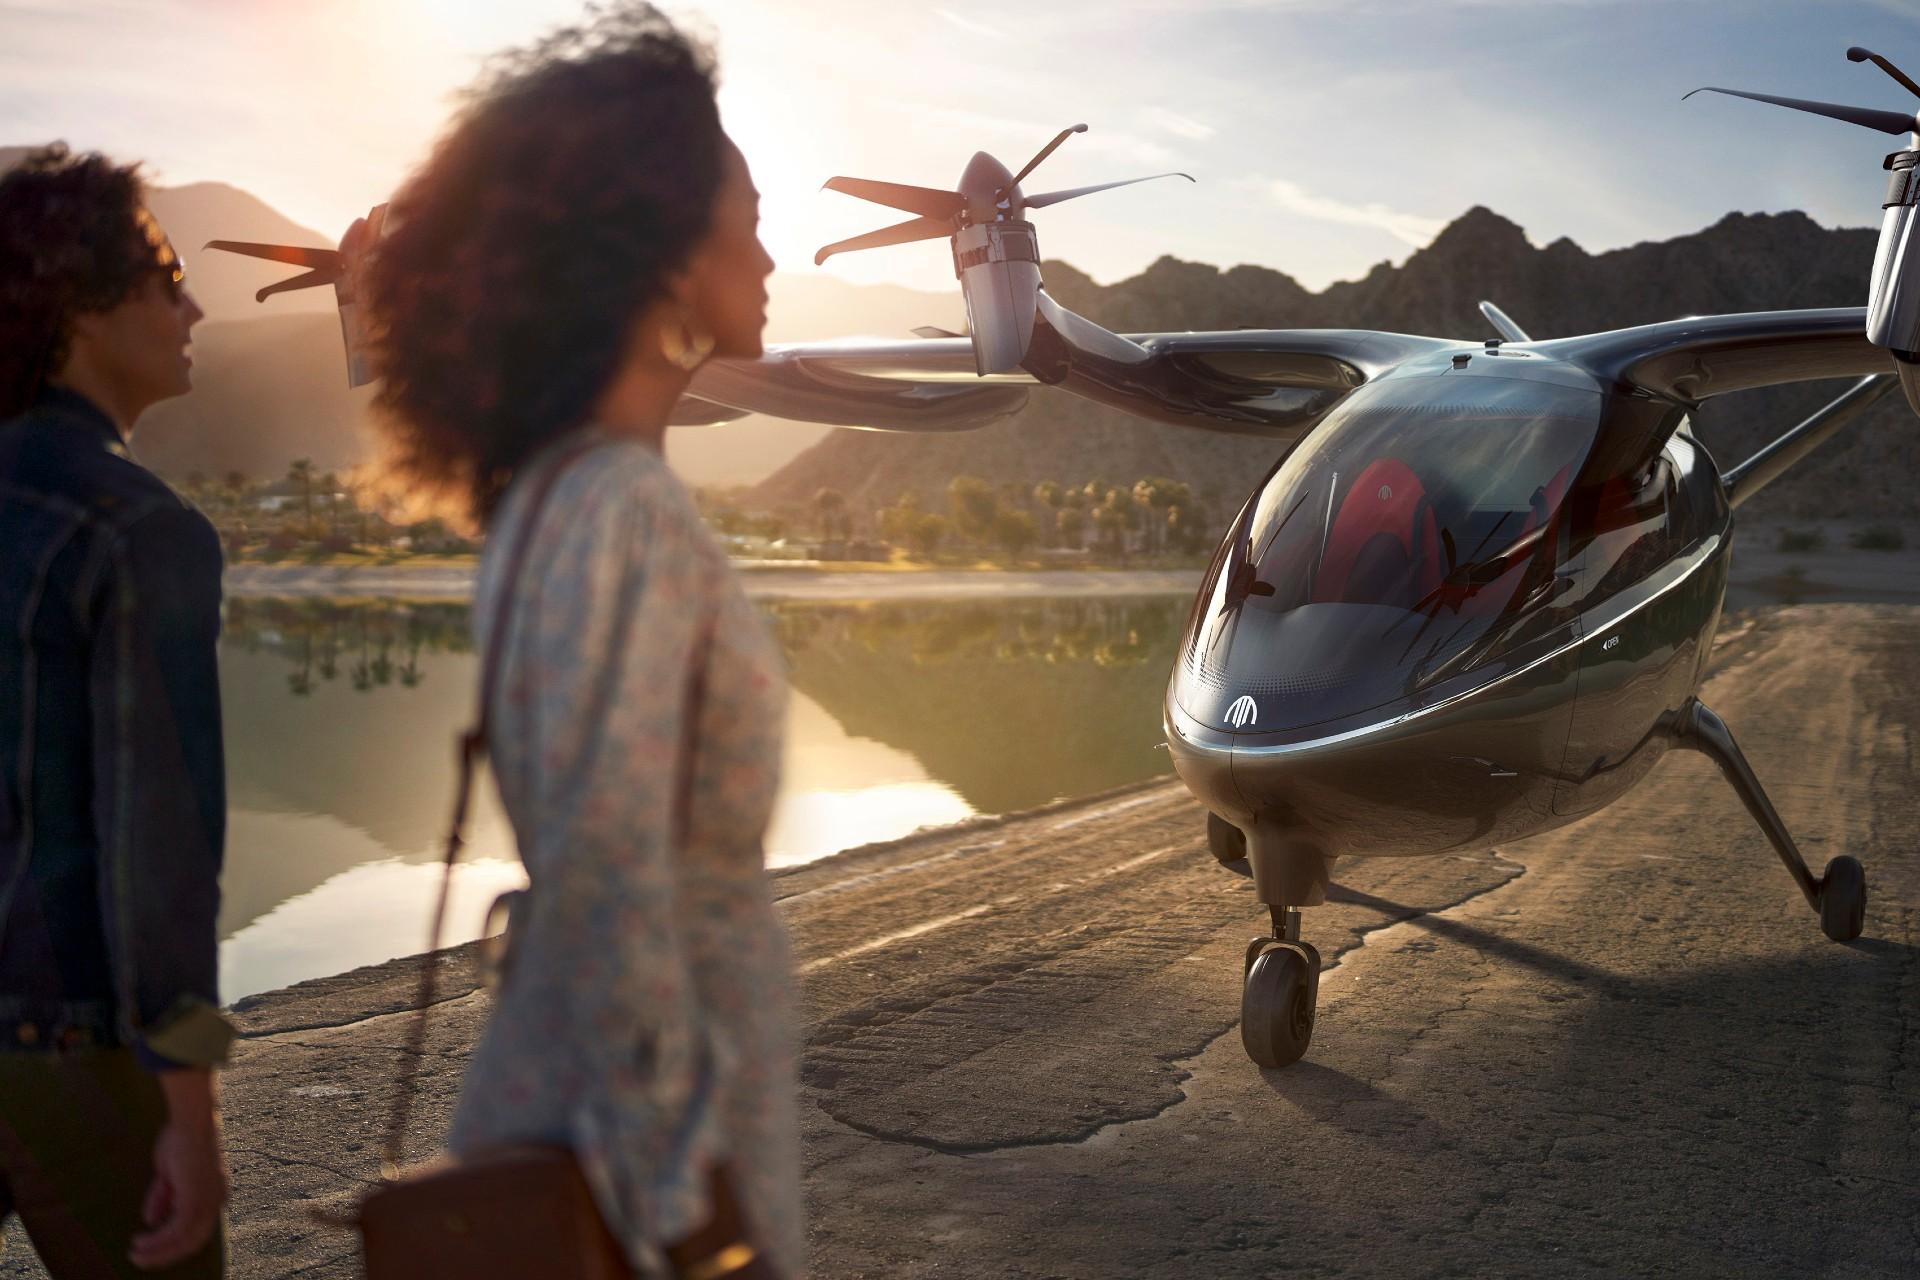 This photo provided by Archer shows the company’s eVTOL aircraft. On Wednesday, Feb. 10, 2021, United Airlines announced it will buy up to 200 small electric air taxis to help customers in urban areas get to the airport. (Jeff Ludes / Archer via AP)